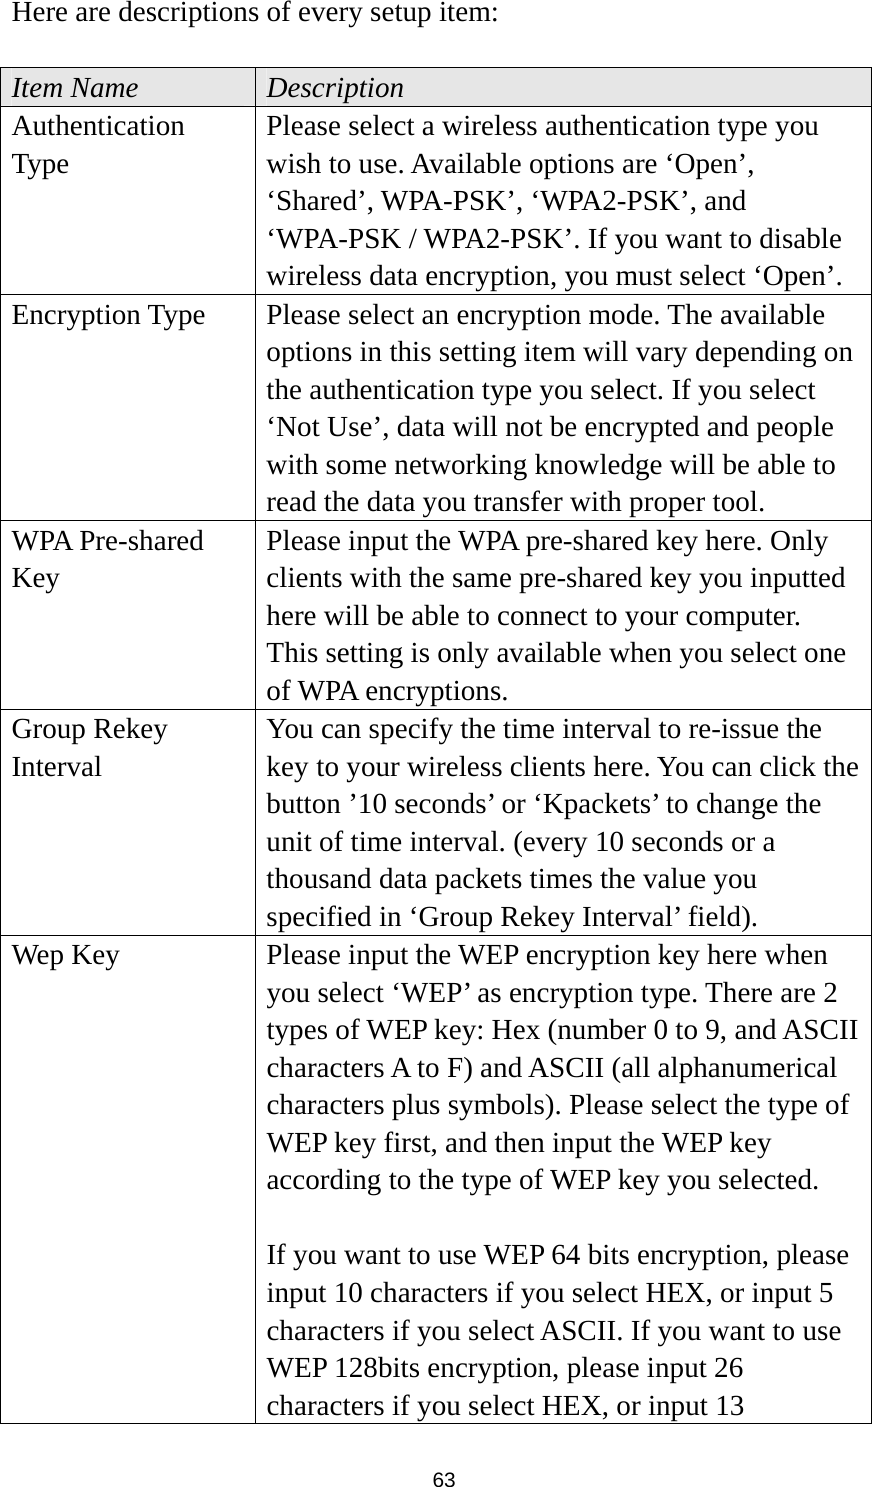  63 Here are descriptions of every setup item:  Item Name  Description Authentication Type Please select a wireless authentication type you wish to use. Available options are ‘Open’, ‘Shared’, WPA-PSK’, ‘WPA2-PSK’, and ‘WPA-PSK / WPA2-PSK’. If you want to disable wireless data encryption, you must select ‘Open’. Encryption Type  Please select an encryption mode. The available options in this setting item will vary depending on the authentication type you select. If you select ‘Not Use’, data will not be encrypted and people with some networking knowledge will be able to read the data you transfer with proper tool. WPA Pre-shared Key Please input the WPA pre-shared key here. Only clients with the same pre-shared key you inputted here will be able to connect to your computer. This setting is only available when you select one of WPA encryptions. Group Rekey Interval You can specify the time interval to re-issue the key to your wireless clients here. You can click the button ’10 seconds’ or ‘Kpackets’ to change the unit of time interval. (every 10 seconds or a thousand data packets times the value you specified in ‘Group Rekey Interval’ field). Wep Key  Please input the WEP encryption key here when you select ‘WEP’ as encryption type. There are 2 types of WEP key: Hex (number 0 to 9, and ASCII characters A to F) and ASCII (all alphanumerical characters plus symbols). Please select the type of WEP key first, and then input the WEP key according to the type of WEP key you selected.  If you want to use WEP 64 bits encryption, please input 10 characters if you select HEX, or input 5 characters if you select ASCII. If you want to use WEP 128bits encryption, please input 26 characters if you select HEX, or input 13 